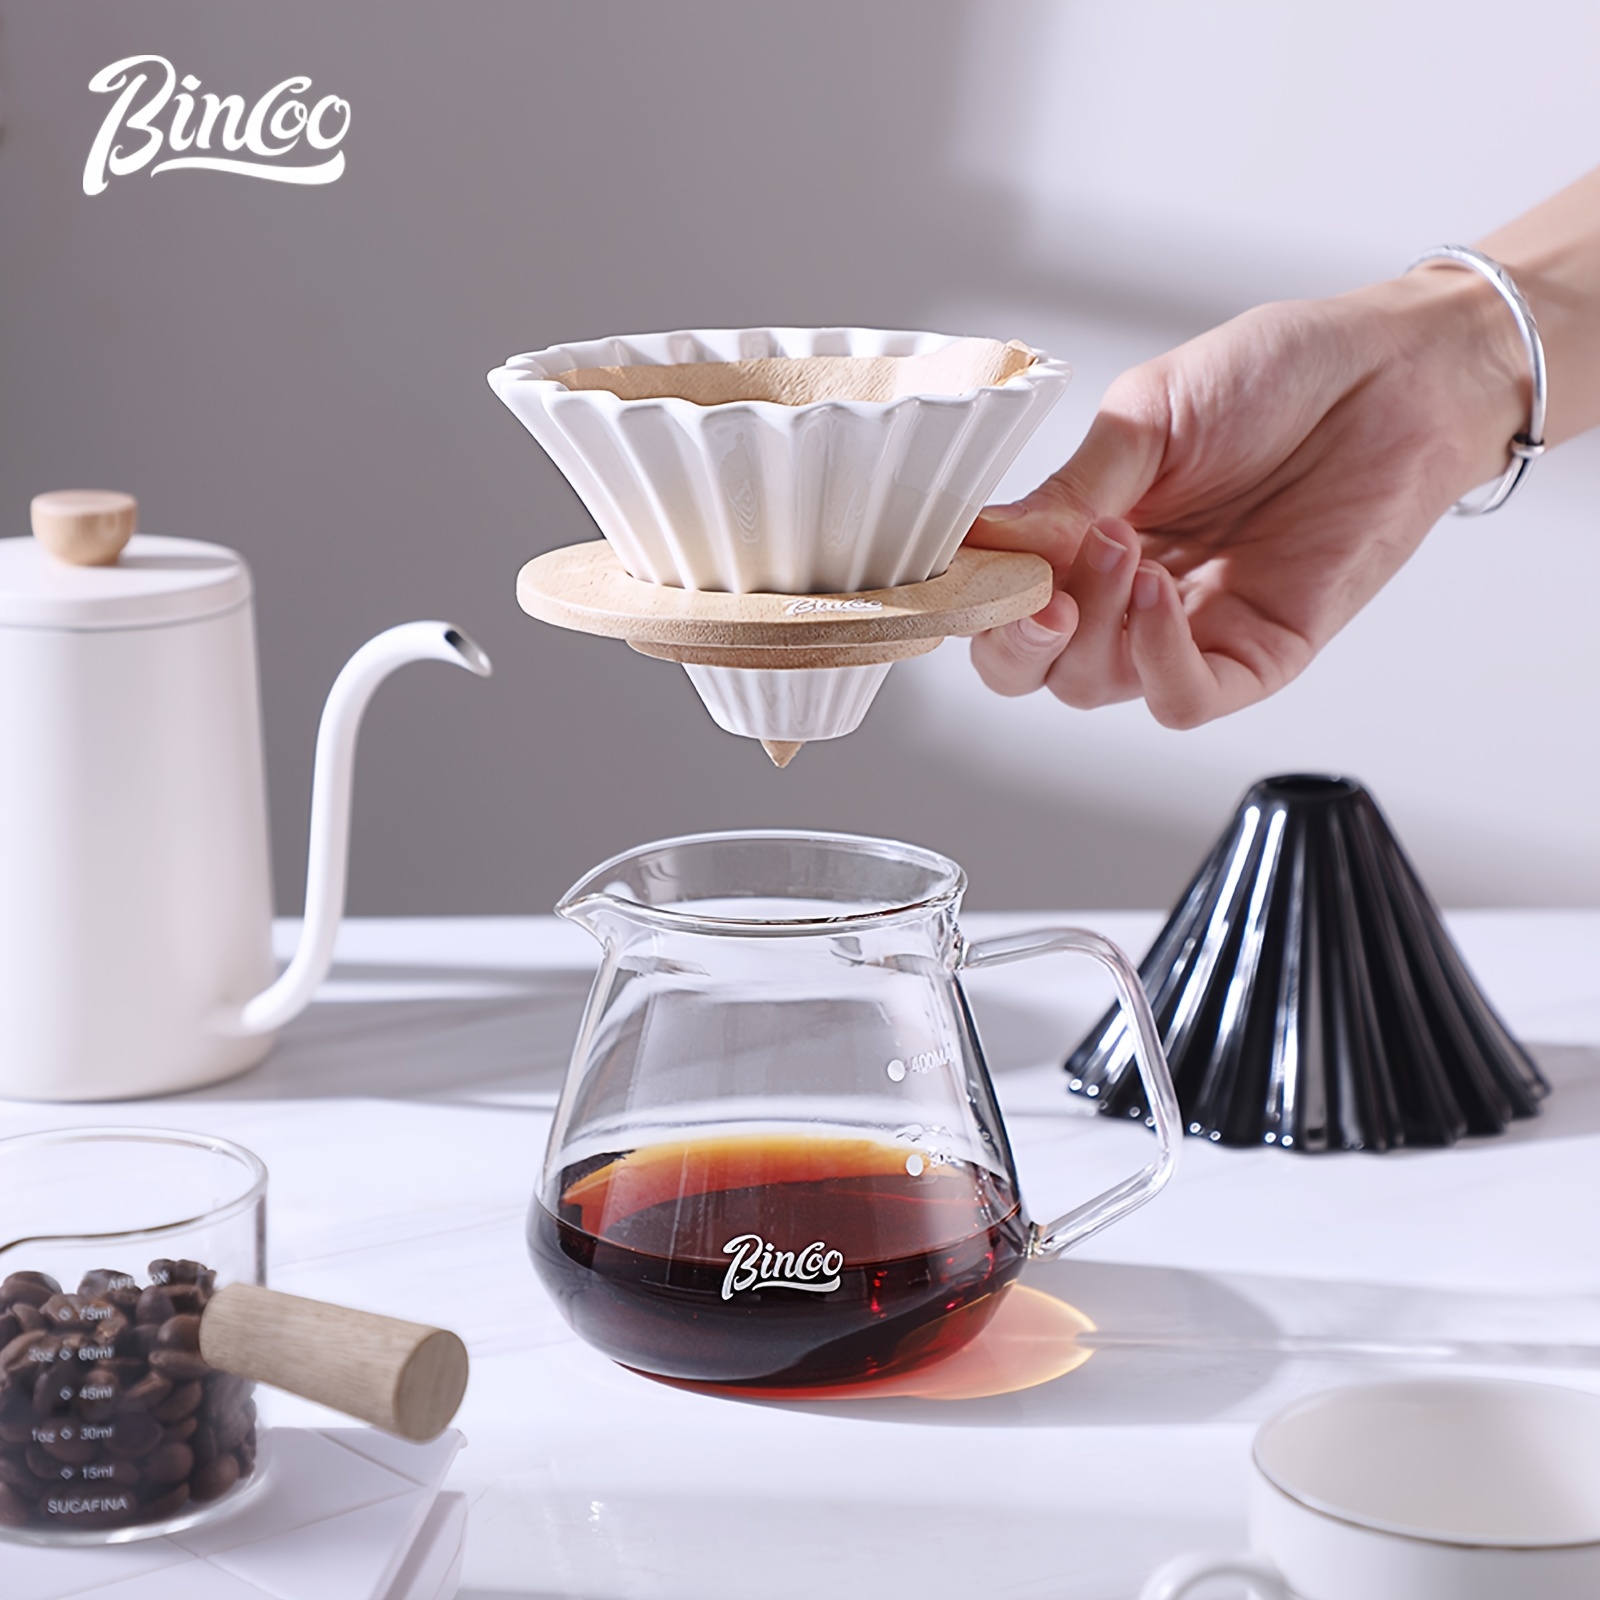 Bincoo Ceramic Pour Over Coffee Dripper Slow Accessories For Home Cafe And Restaurants Easy Manual Brew Coffee Maker Gift For Coffee Lovers Makes 1 3 Cups | Shop Now For